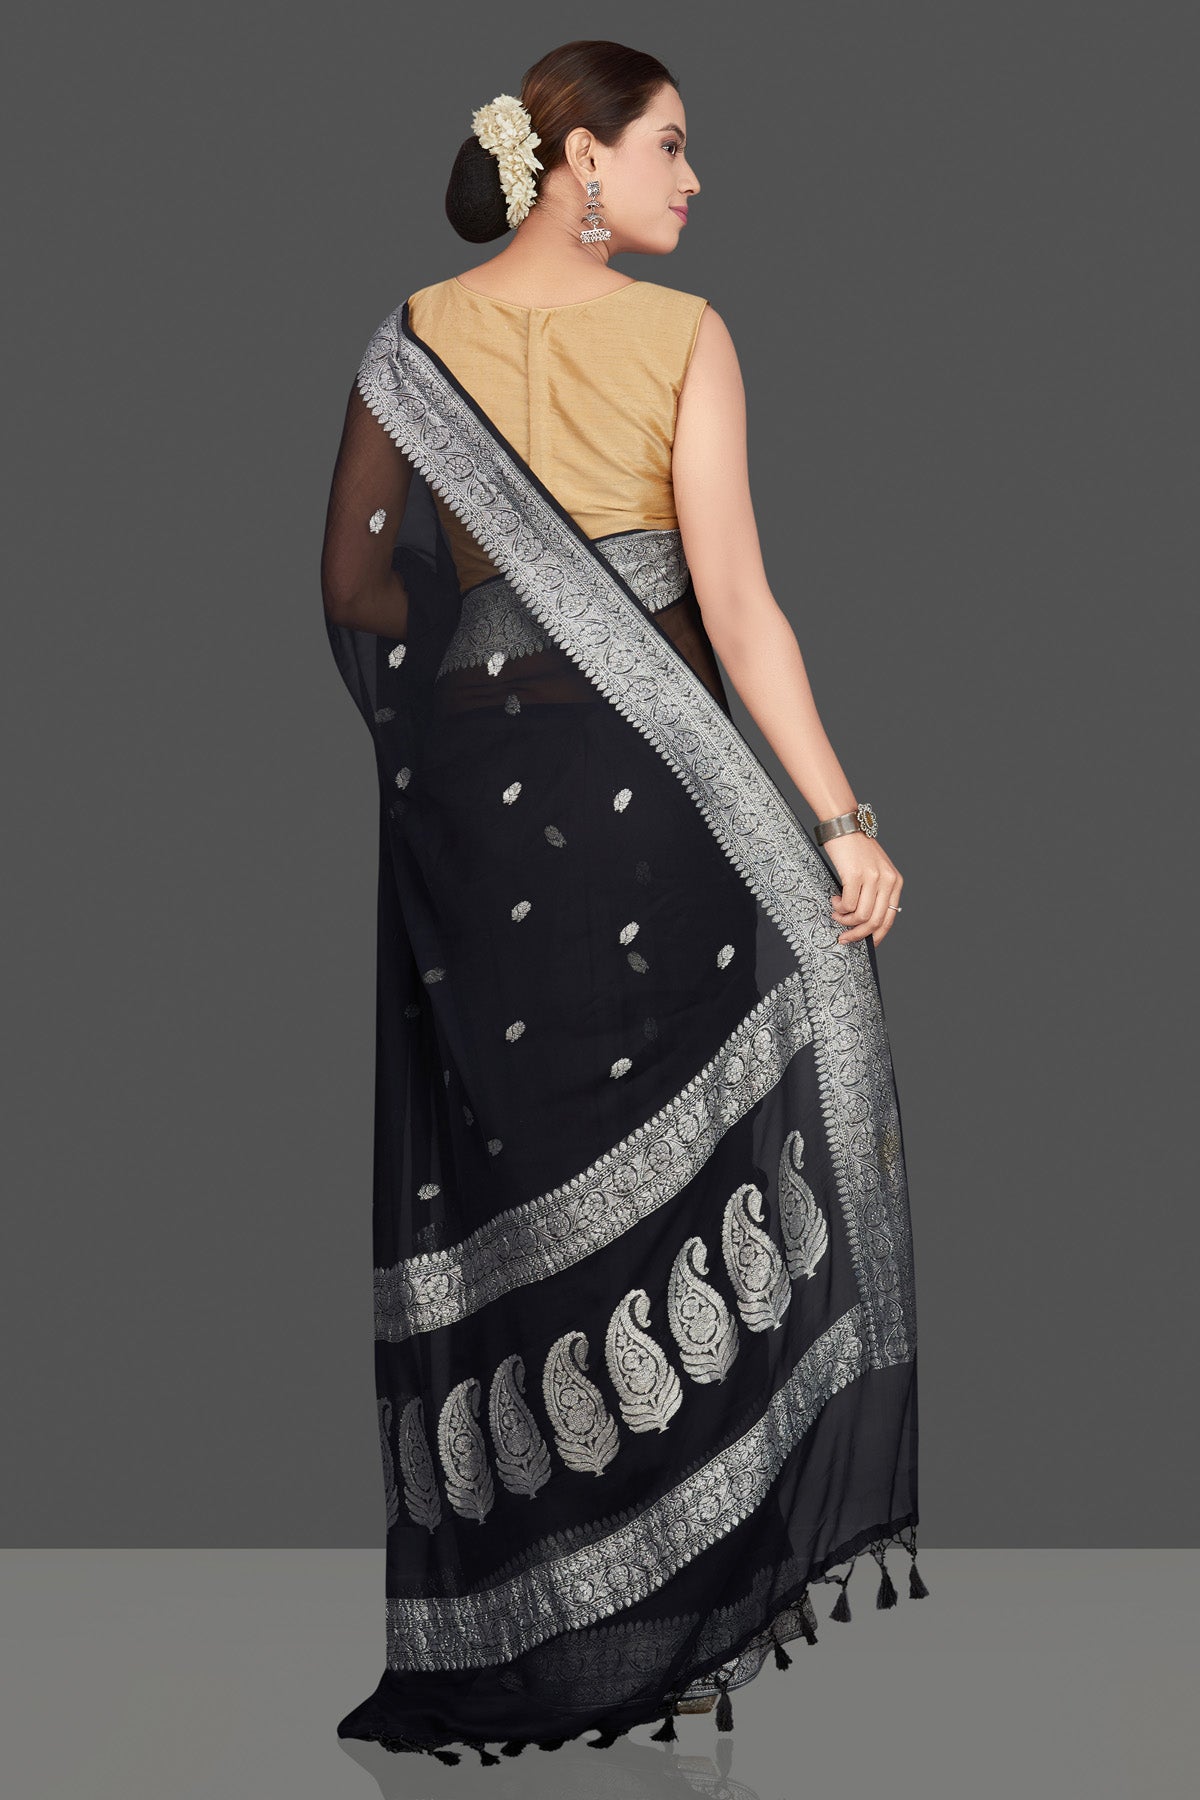 Buy black chiffon georgette saree online in USA with silver zari border. Go for stunning Indian designer sarees, georgette sarees, handwoven saris, embroidered sarees for festive occasions and weddings from Pure Elegance Indian clothing store in USA.-back